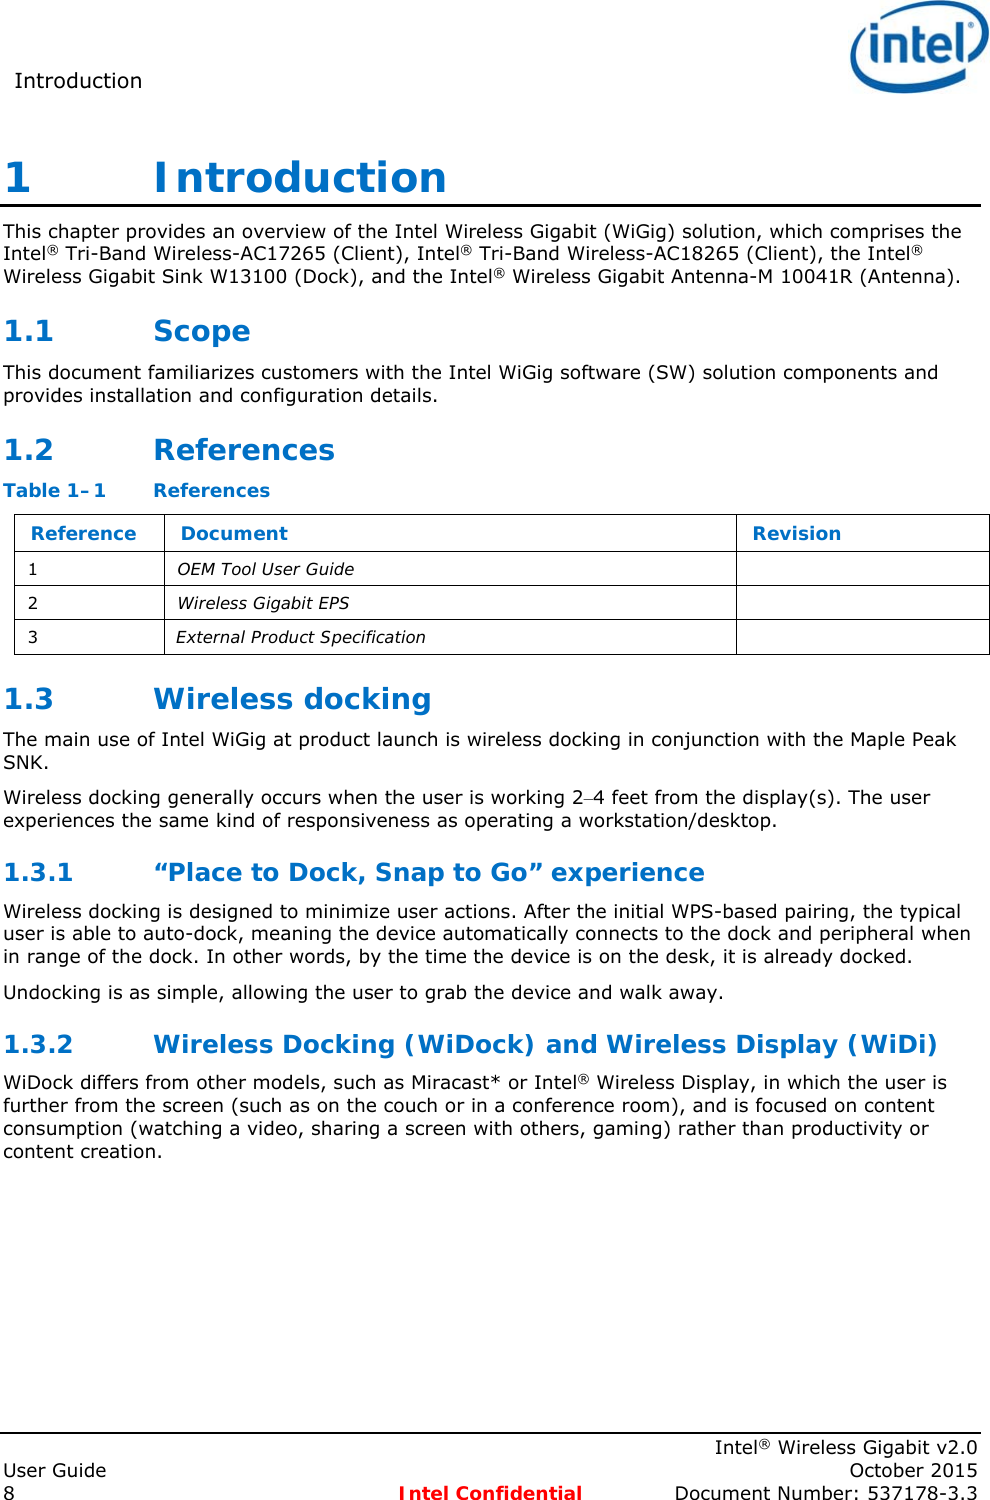 Introduction      Intel® Wireless Gigabit v2.0 User Guide    October 2015 8 Intel Confidential  Document Number: 537178-3.3 1   Introduction This chapter provides an overview of the Intel Wireless Gigabit (WiGig) solution, which comprises the Intel® Tri-Band Wireless-AC17265 (Client), Intel® Tri-Band Wireless-AC18265 (Client), the Intel® Wireless Gigabit Sink W13100 (Dock), and the Intel® Wireless Gigabit Antenna-M 10041R (Antenna). 1.1 Scope This document familiarizes customers with the Intel WiGig software (SW) solution components and provides installation and configuration details. 1.2 References Table 1–1  References Reference  Document  Revision 1  OEM Tool User Guide   2  Wireless Gigabit EPS   3  External Product Specification   1.3 Wireless docking The main use of Intel WiGig at product launch is wireless docking in conjunction with the Maple Peak SNK. Wireless docking generally occurs when the user is working 2–4 feet from the display(s). The user experiences the same kind of responsiveness as operating a workstation/desktop. 1.3.1 “Place to Dock, Snap to Go” experience Wireless docking is designed to minimize user actions. After the initial WPS-based pairing, the typical user is able to auto-dock, meaning the device automatically connects to the dock and peripheral when in range of the dock. In other words, by the time the device is on the desk, it is already docked. Undocking is as simple, allowing the user to grab the device and walk away. 1.3.2 Wireless Docking (WiDock) and Wireless Display (WiDi) WiDock differs from other models, such as Miracast* or Intel® Wireless Display, in which the user is further from the screen (such as on the couch or in a conference room), and is focused on content consumption (watching a video, sharing a screen with others, gaming) rather than productivity or content creation. 